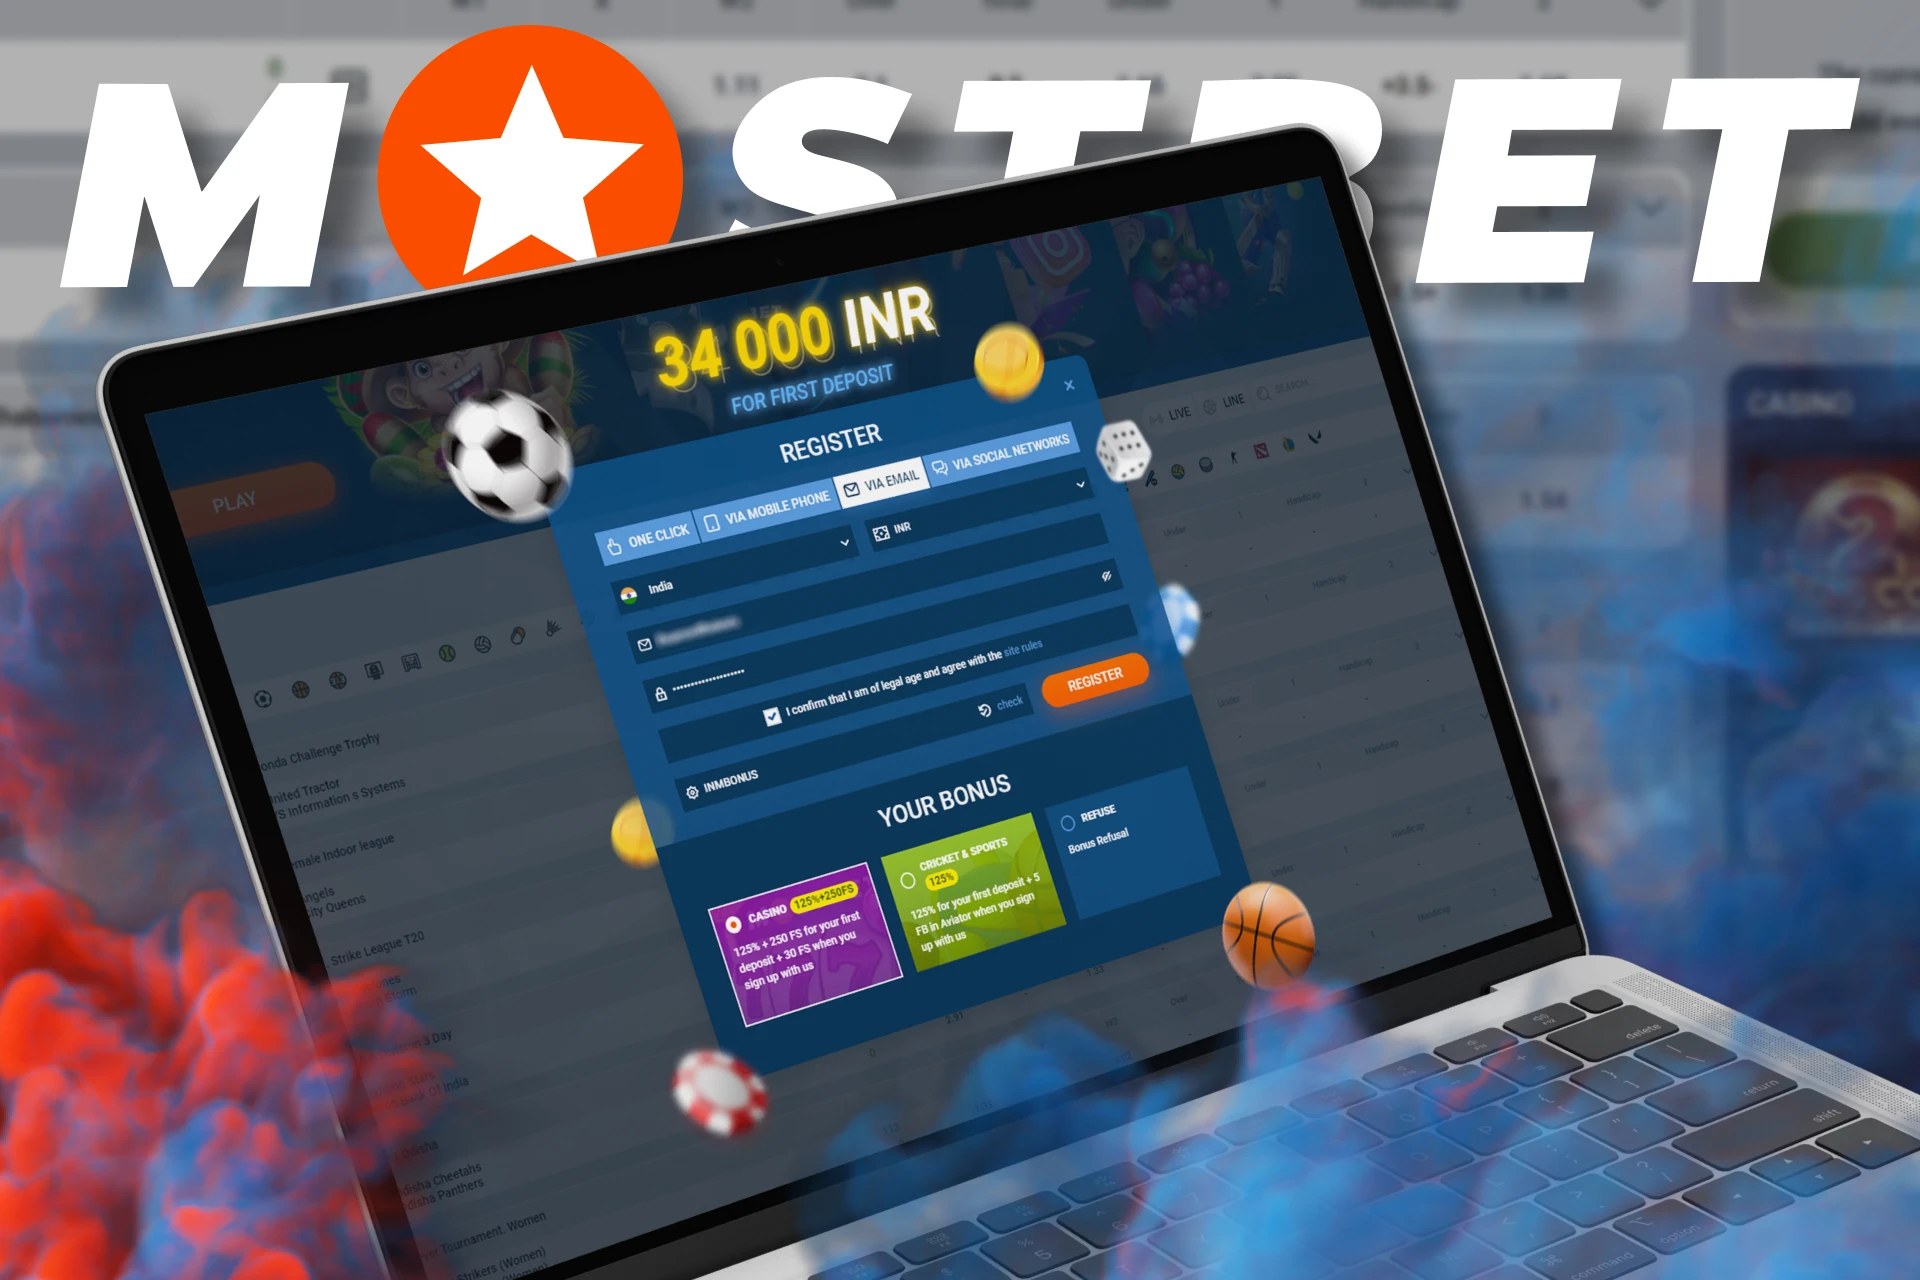 Sign up for Mostbet via your email account.